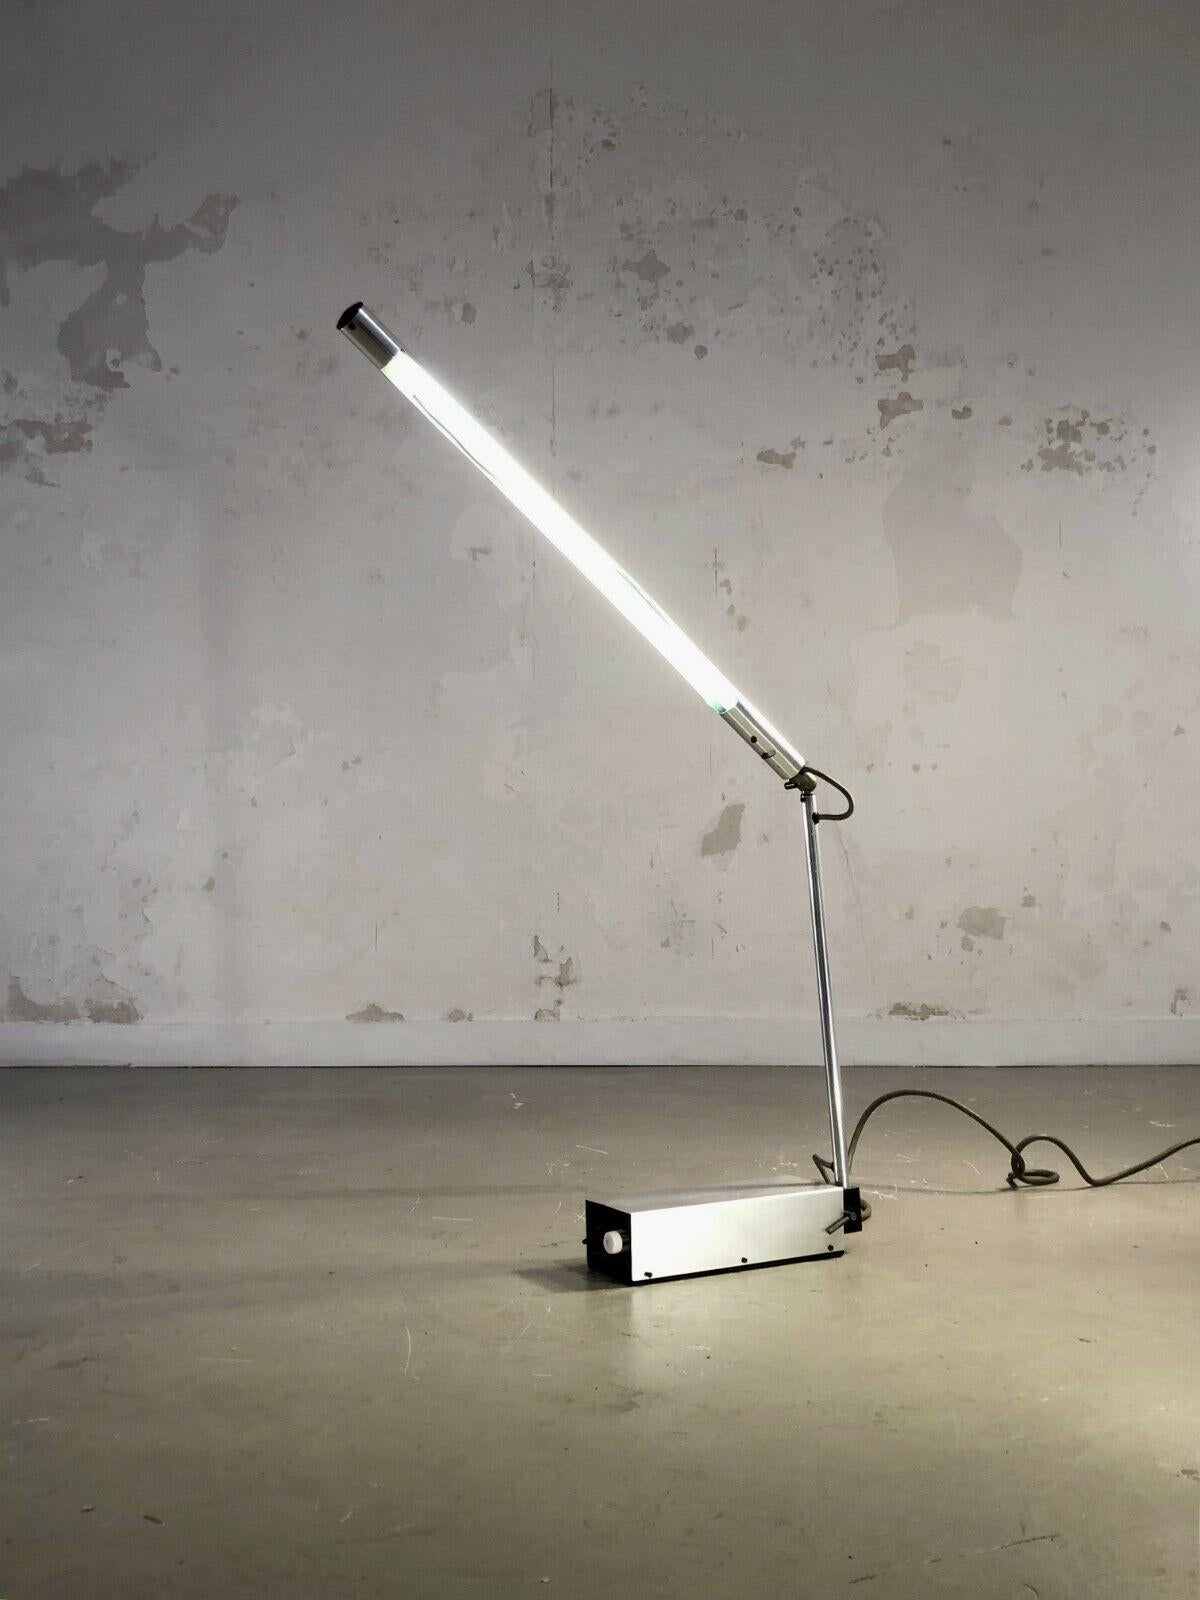 A rare table lamp, Post-Modernist, Memphis, Kinetic, Radical Design, Minimalist, rectangular base with aluminum cover housing a transformer, vertical axis and adjustable aluminum arm, fine neon lighting embedded in the arm, by Gerald Abramovitz,